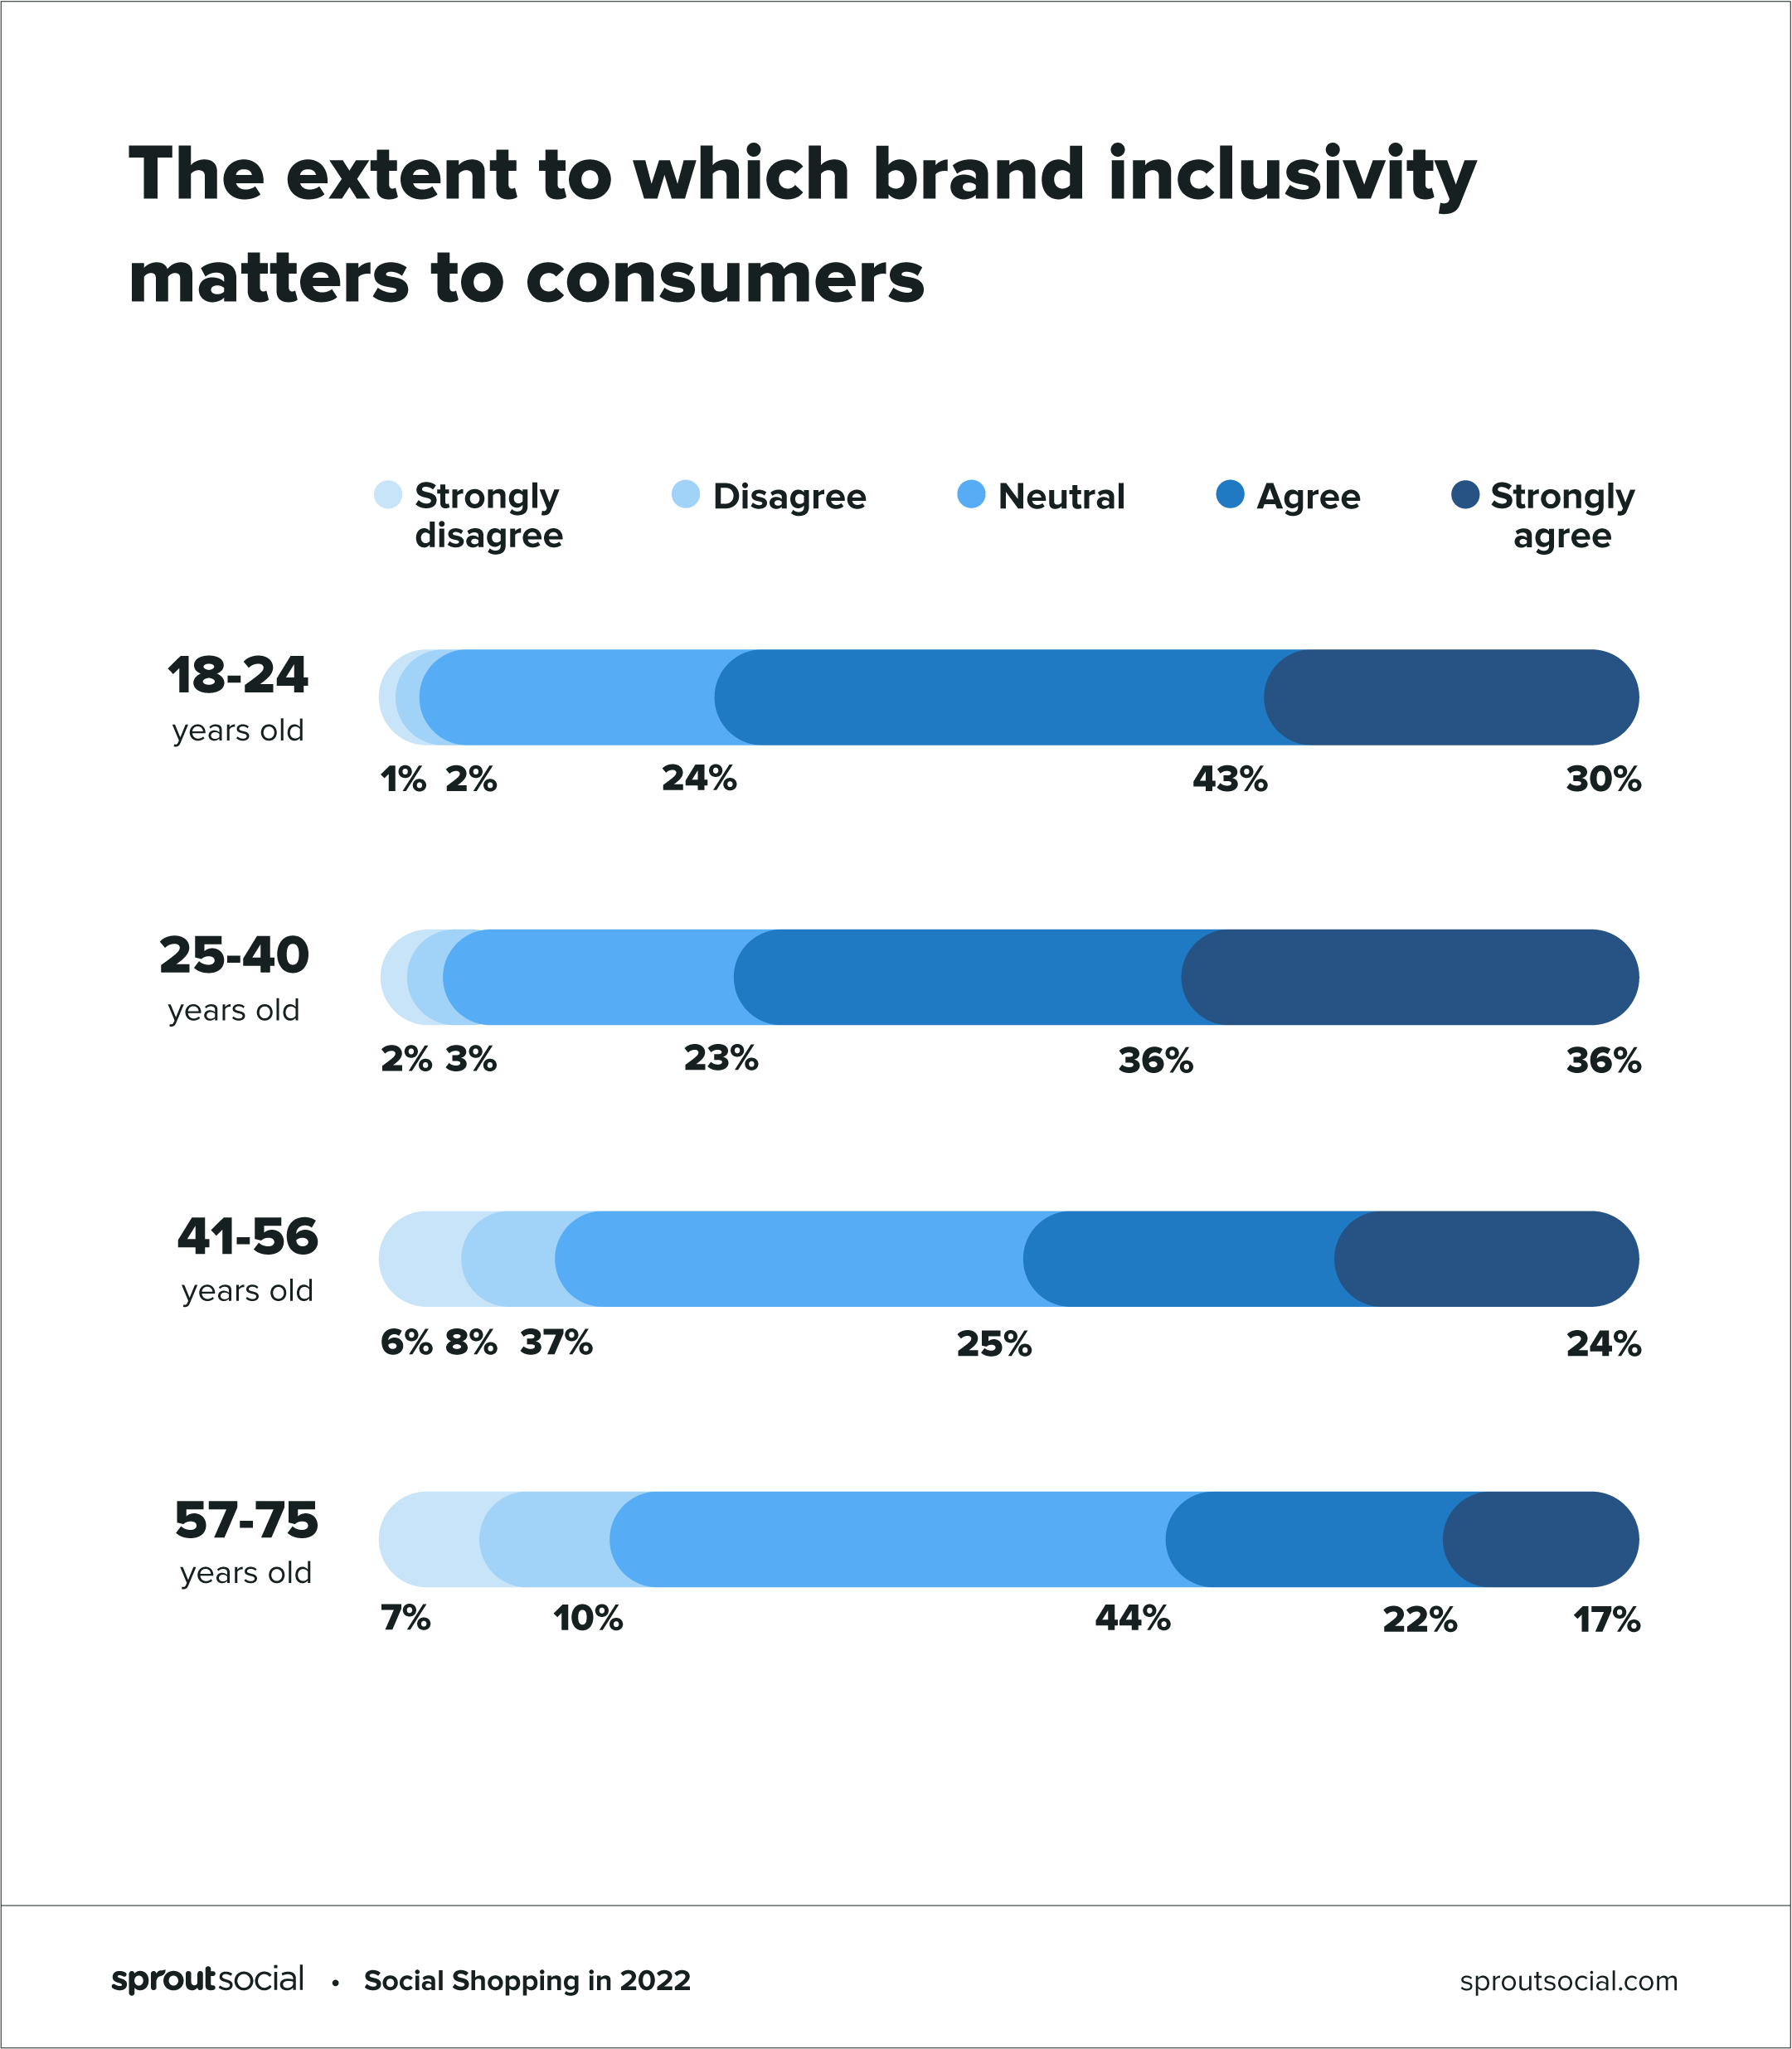 Graphic showing the extent to which brand inclusivity matters to consumers when buying on social, by age group